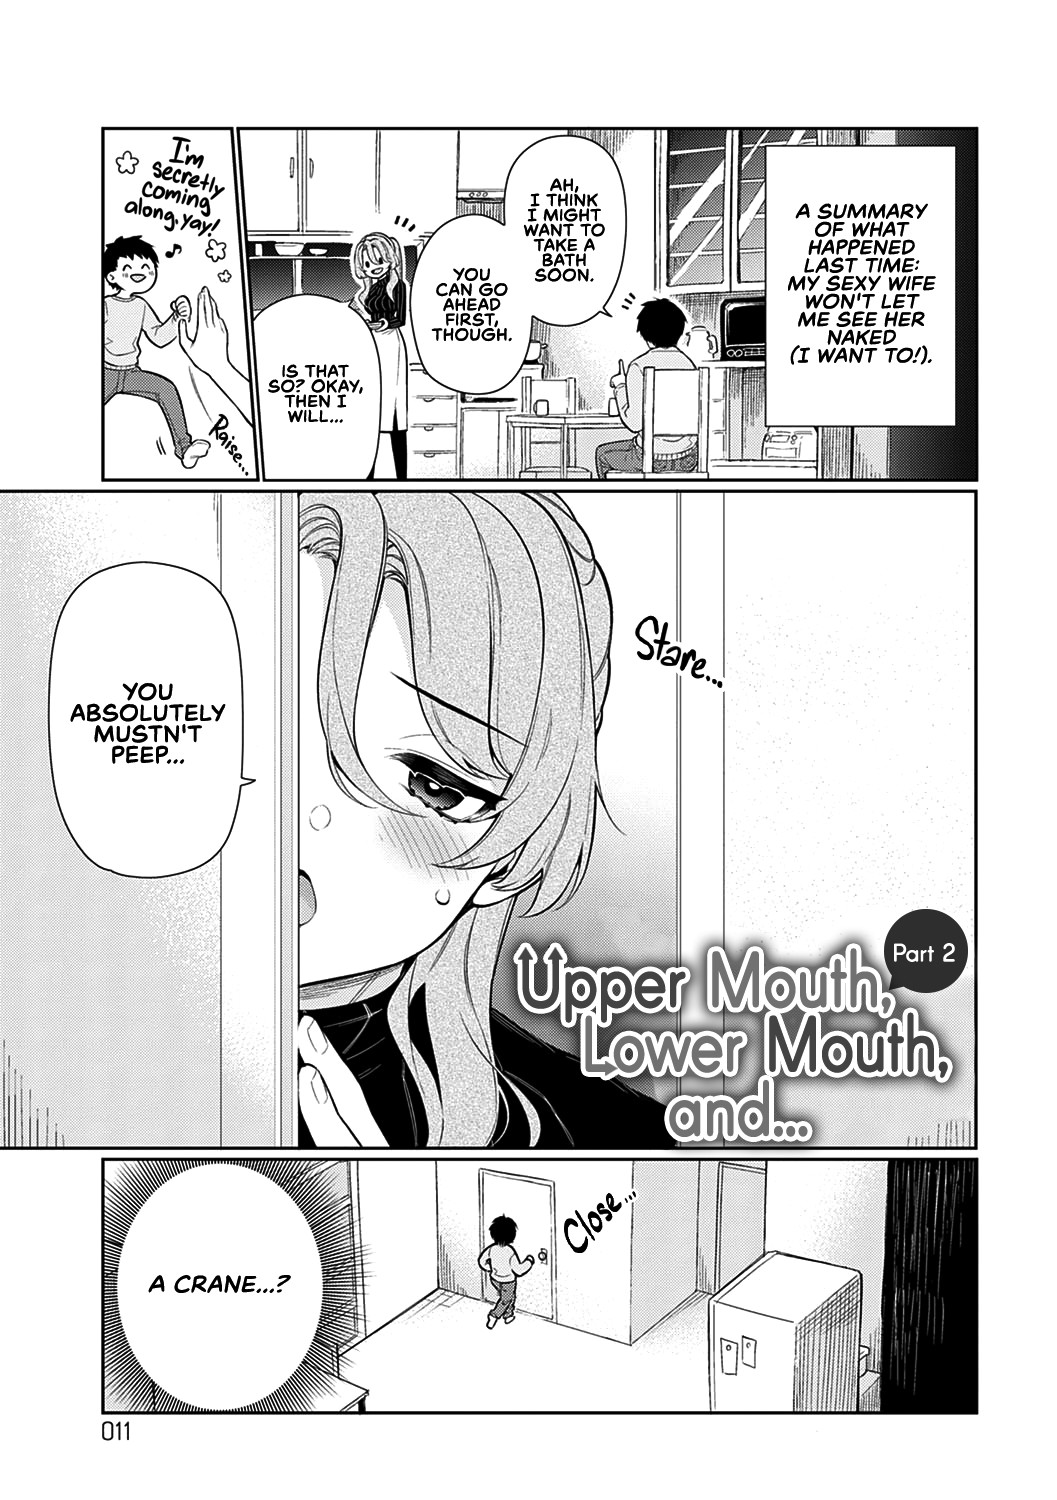 Hentai Manga Comic-Upper Mouth, Lower Mouth, and... Part 2-Read-1